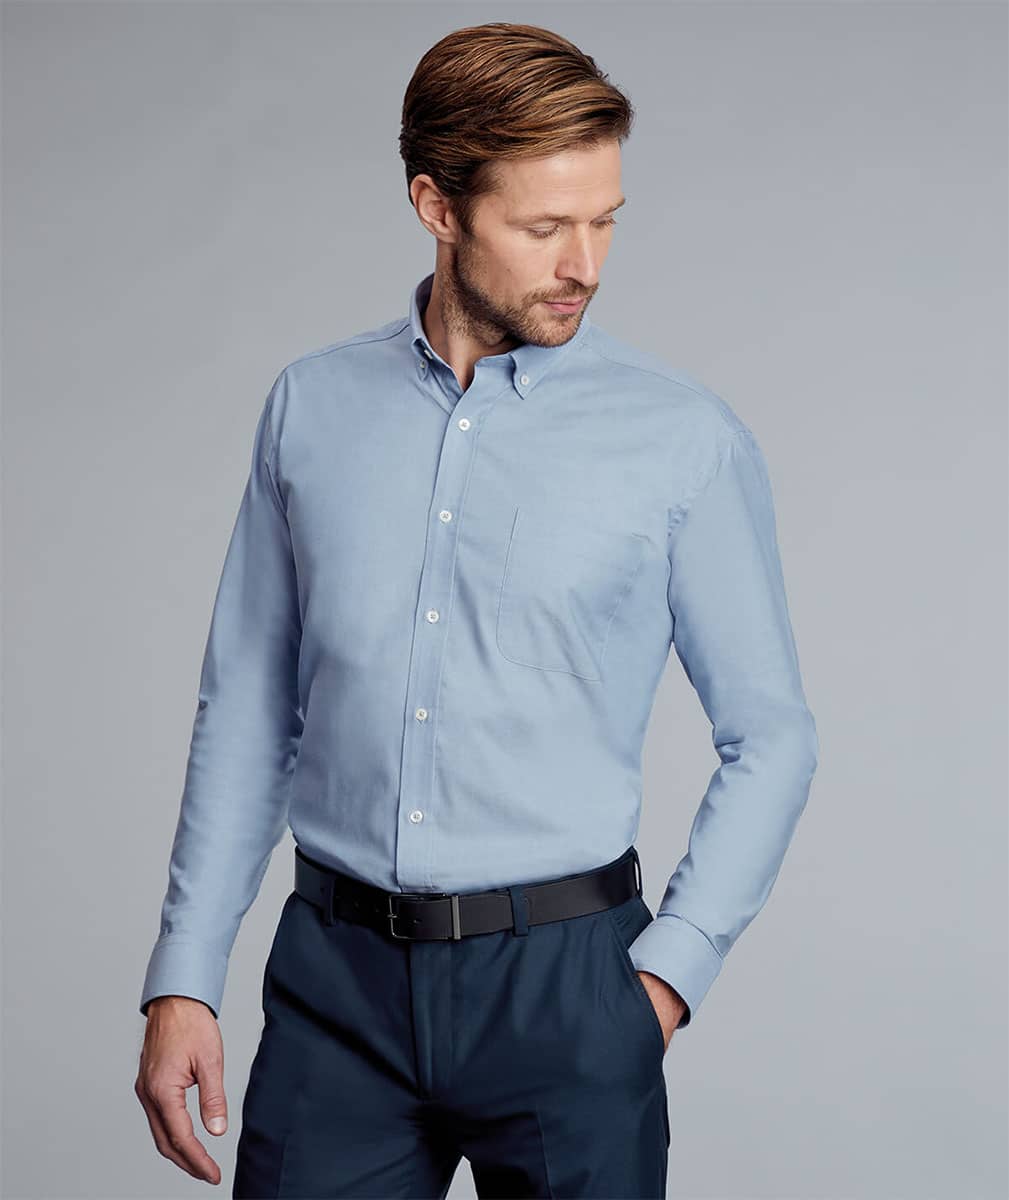 Oxford Button Down Discount Buying, Save 67% | jlcatj.gob.mx